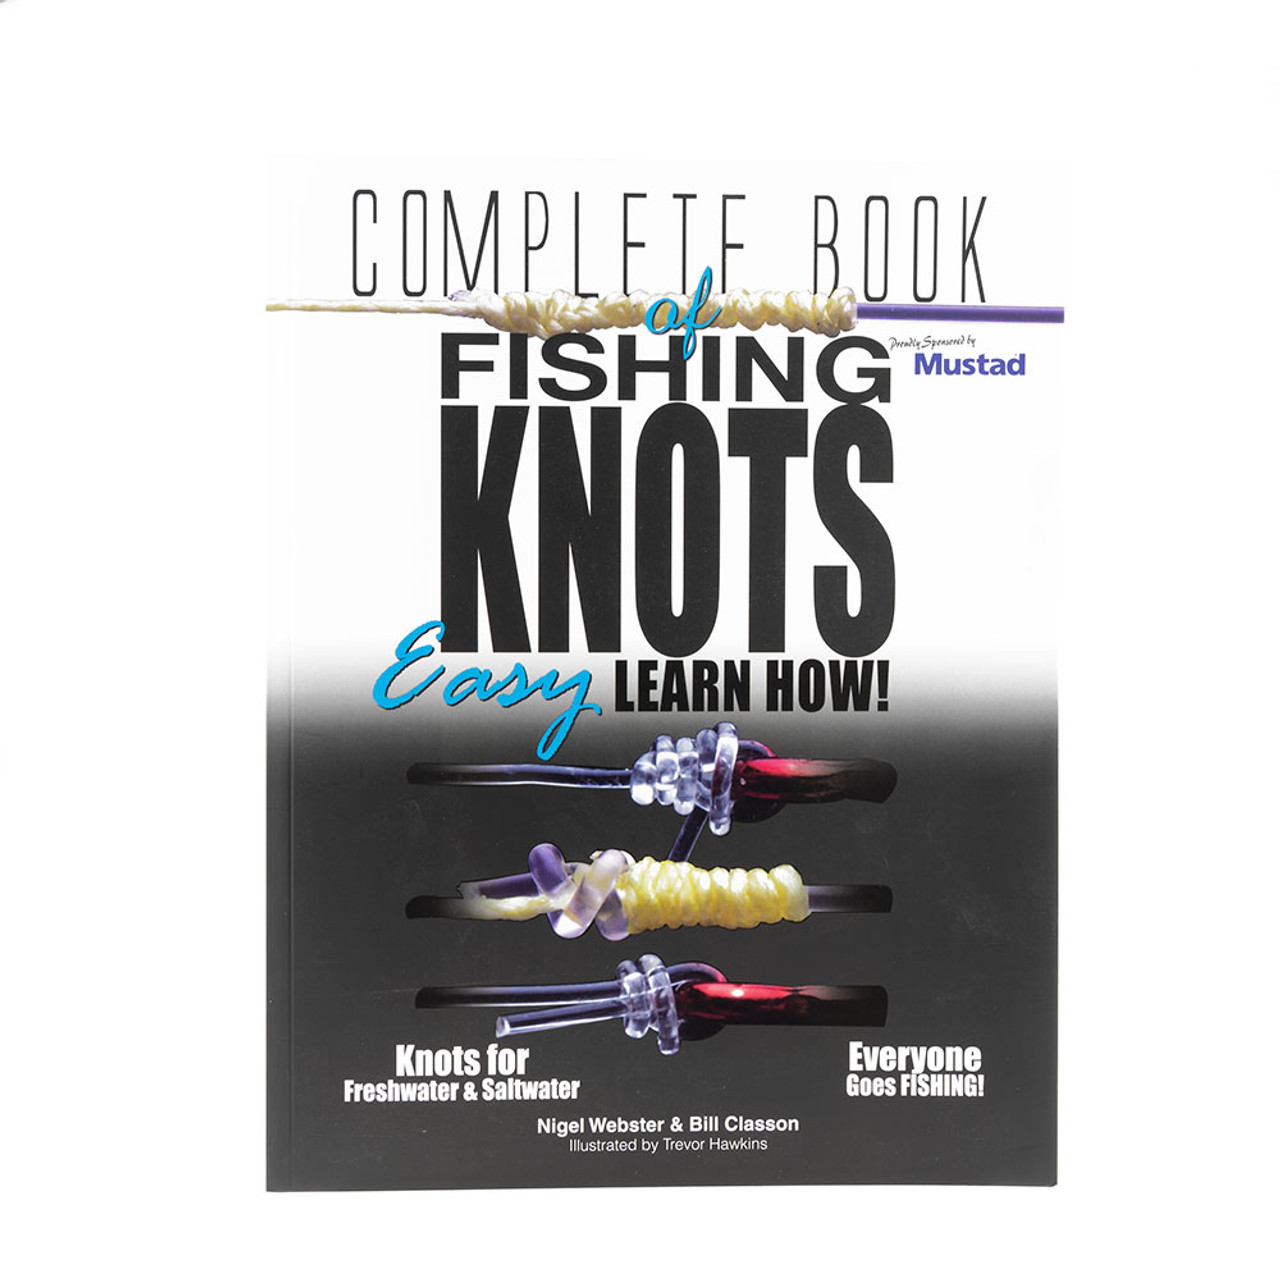 Complete book of Fishing Knots